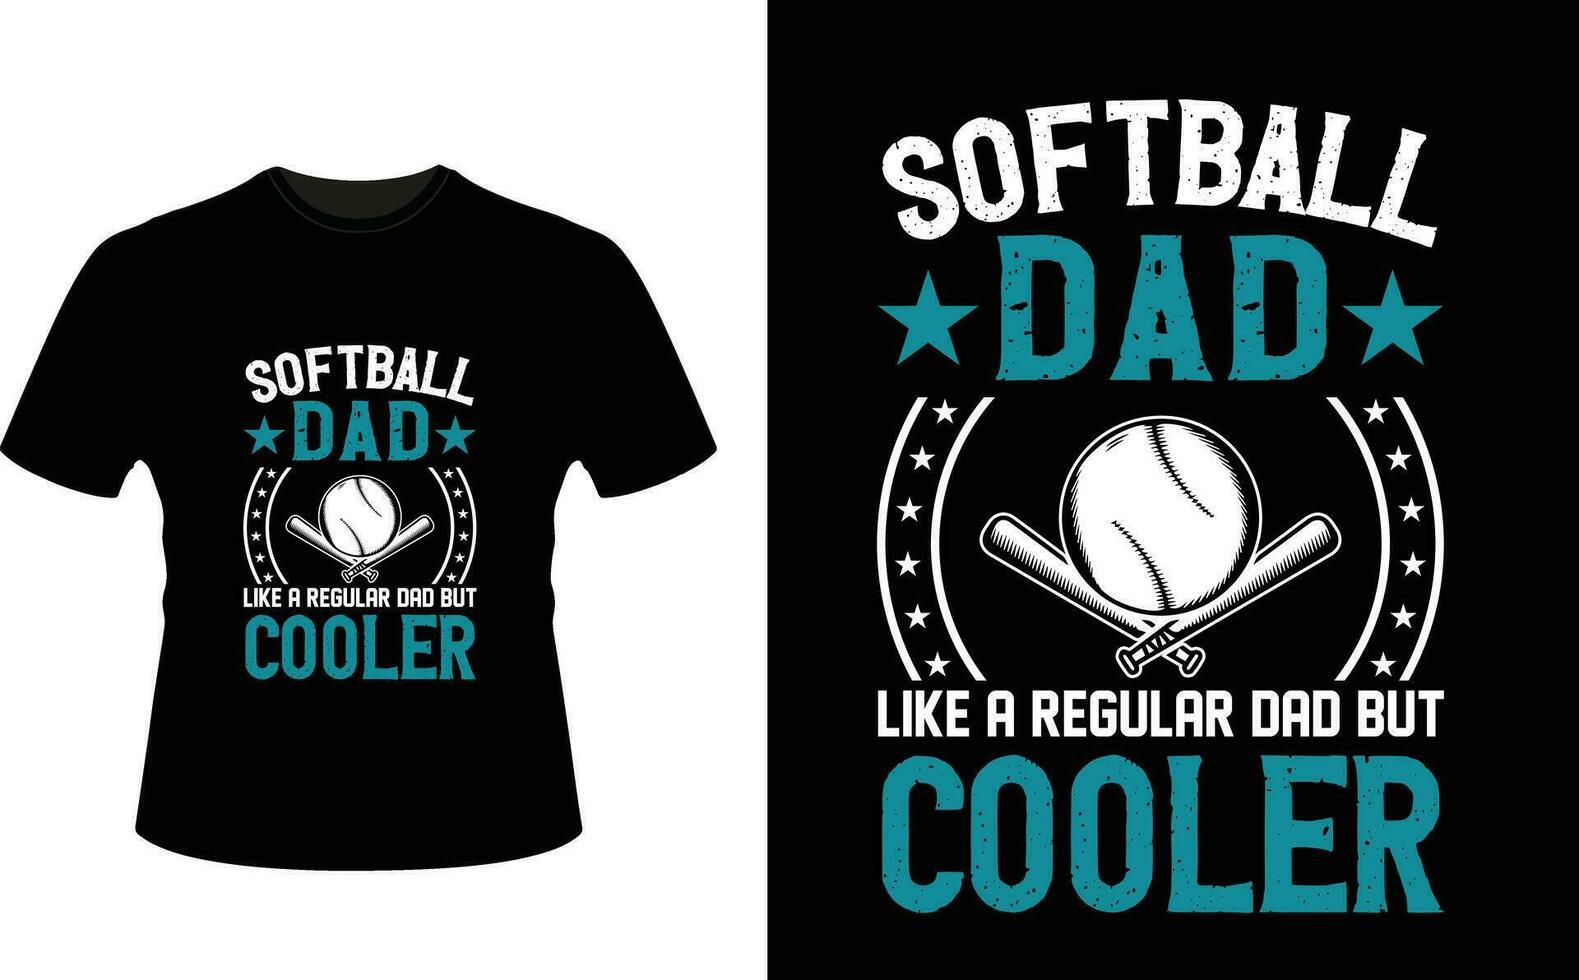 Softball Dad Like a Regular Dad But Cooler or dad papa tshirt design or Father day t shirt Design vector